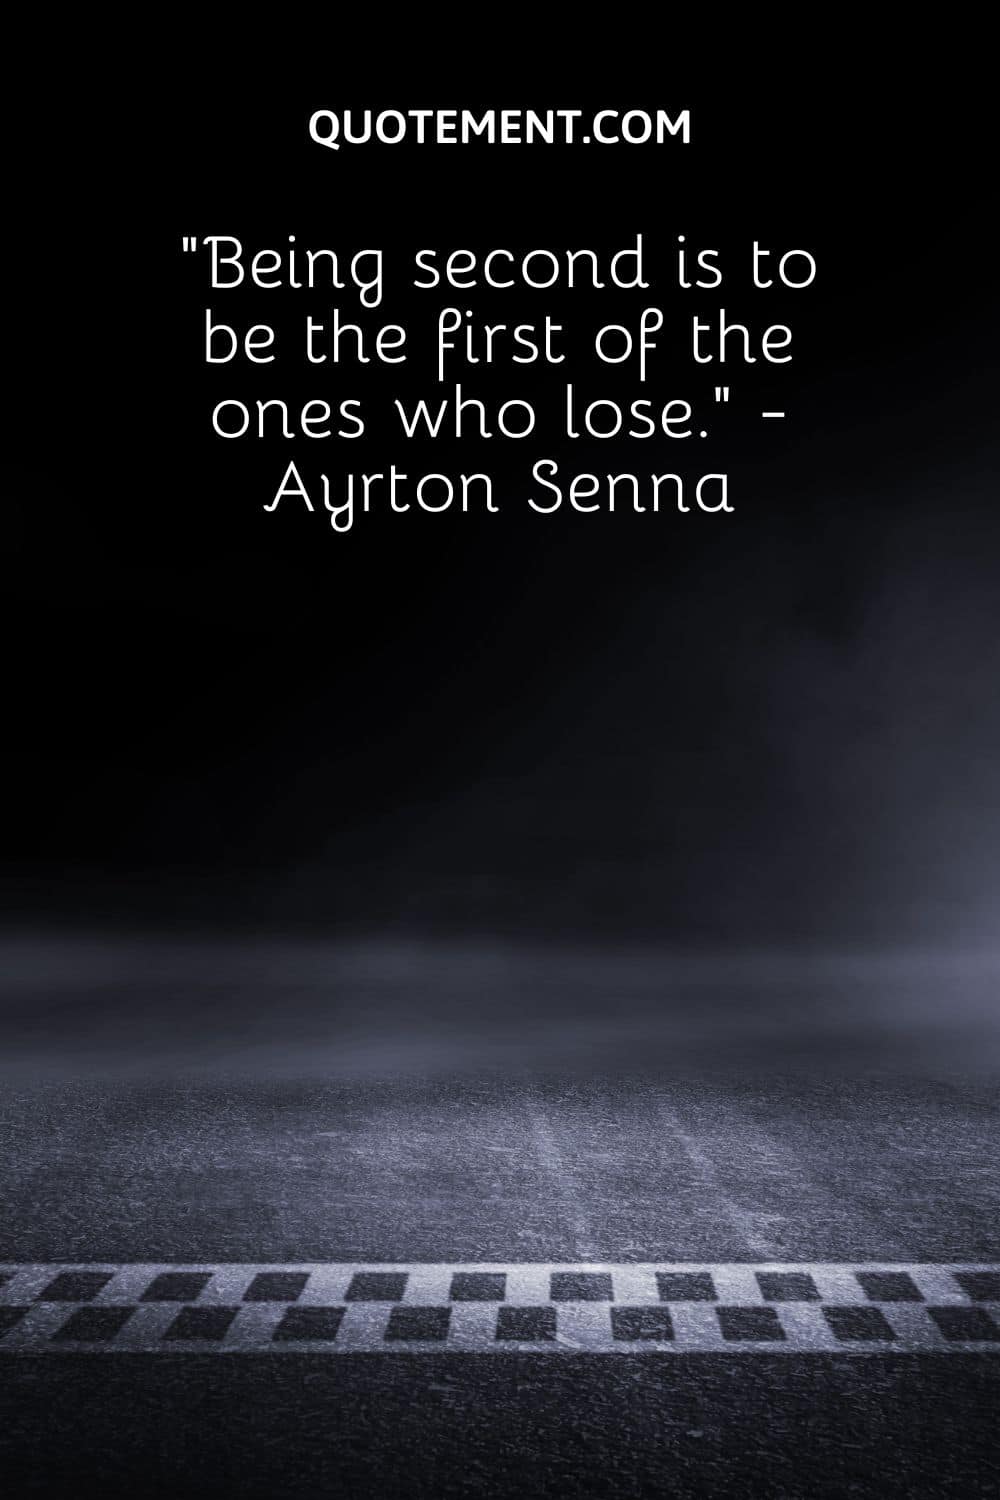 Being second is to be the first of the ones who lose